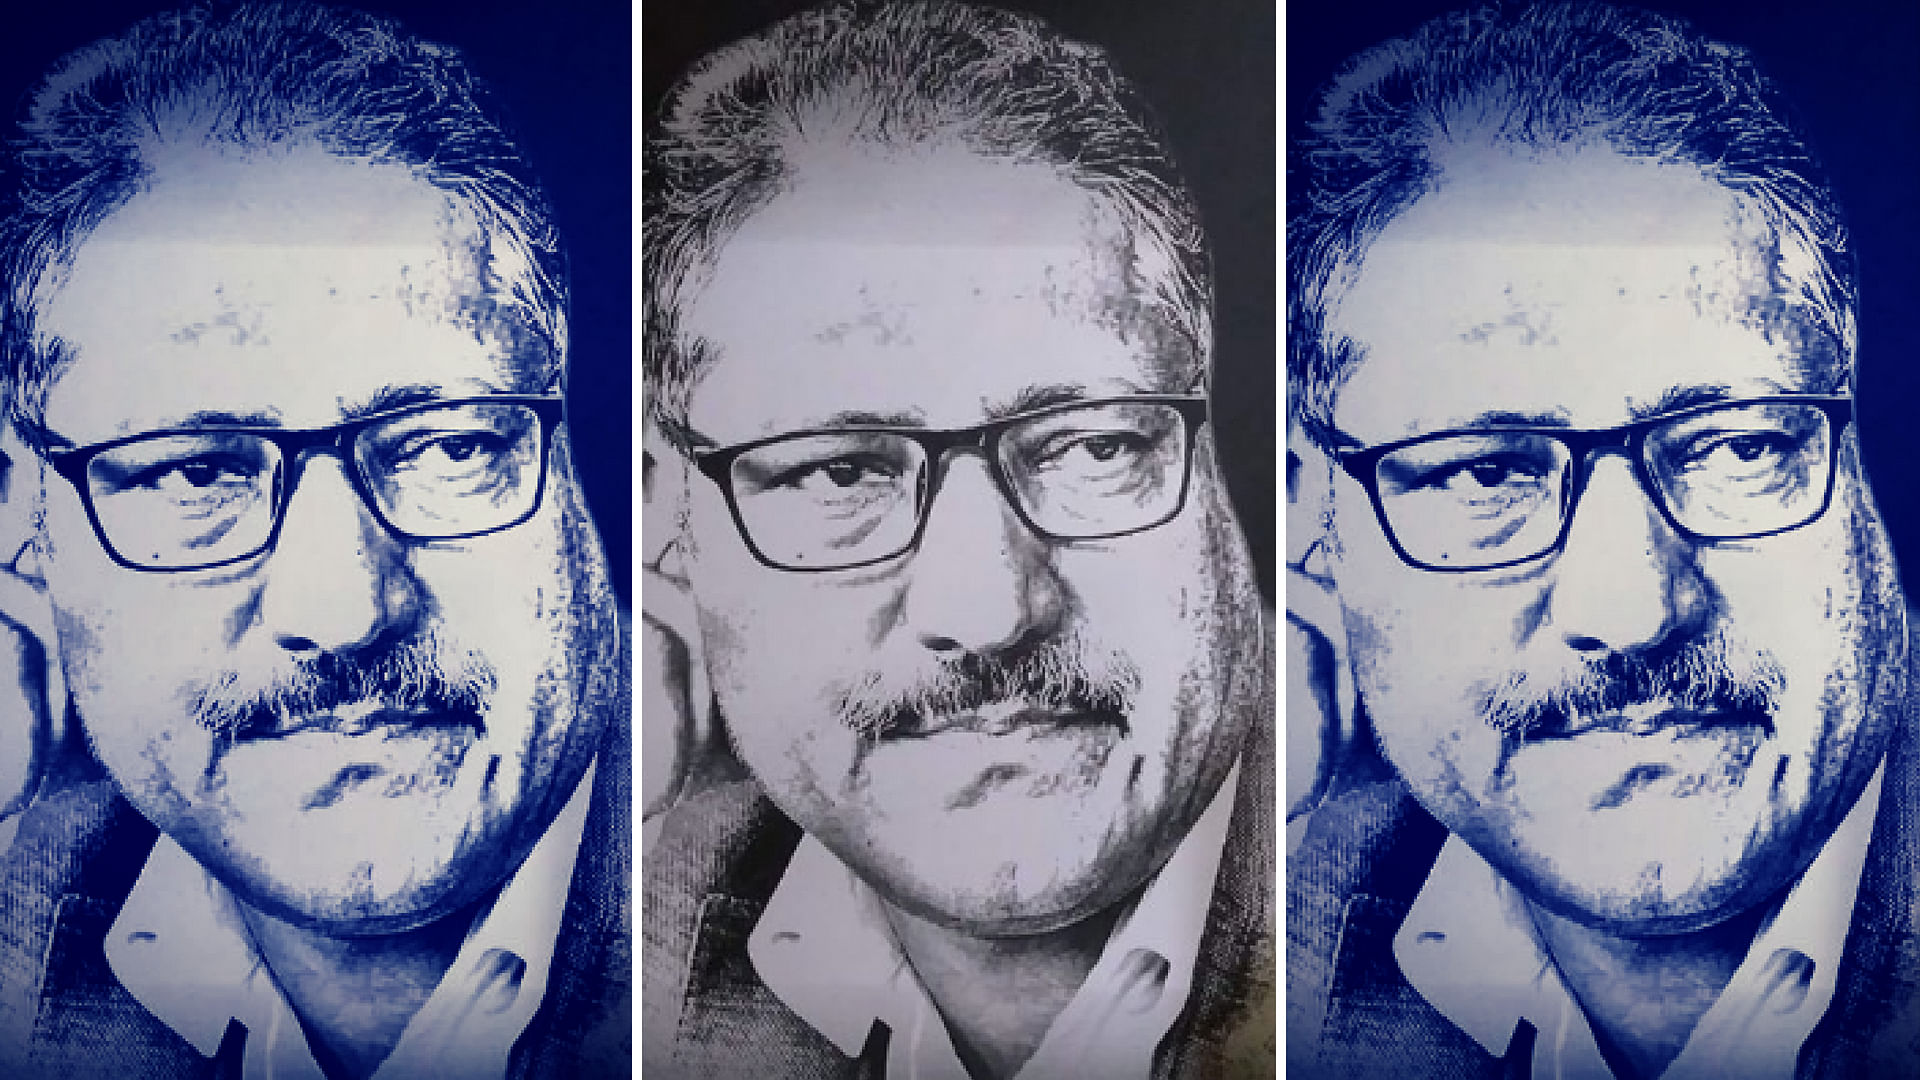 Rising Kashmir paid a touching front page tribute to slain journalist Shujaat Bukhari in its 15 June edition.